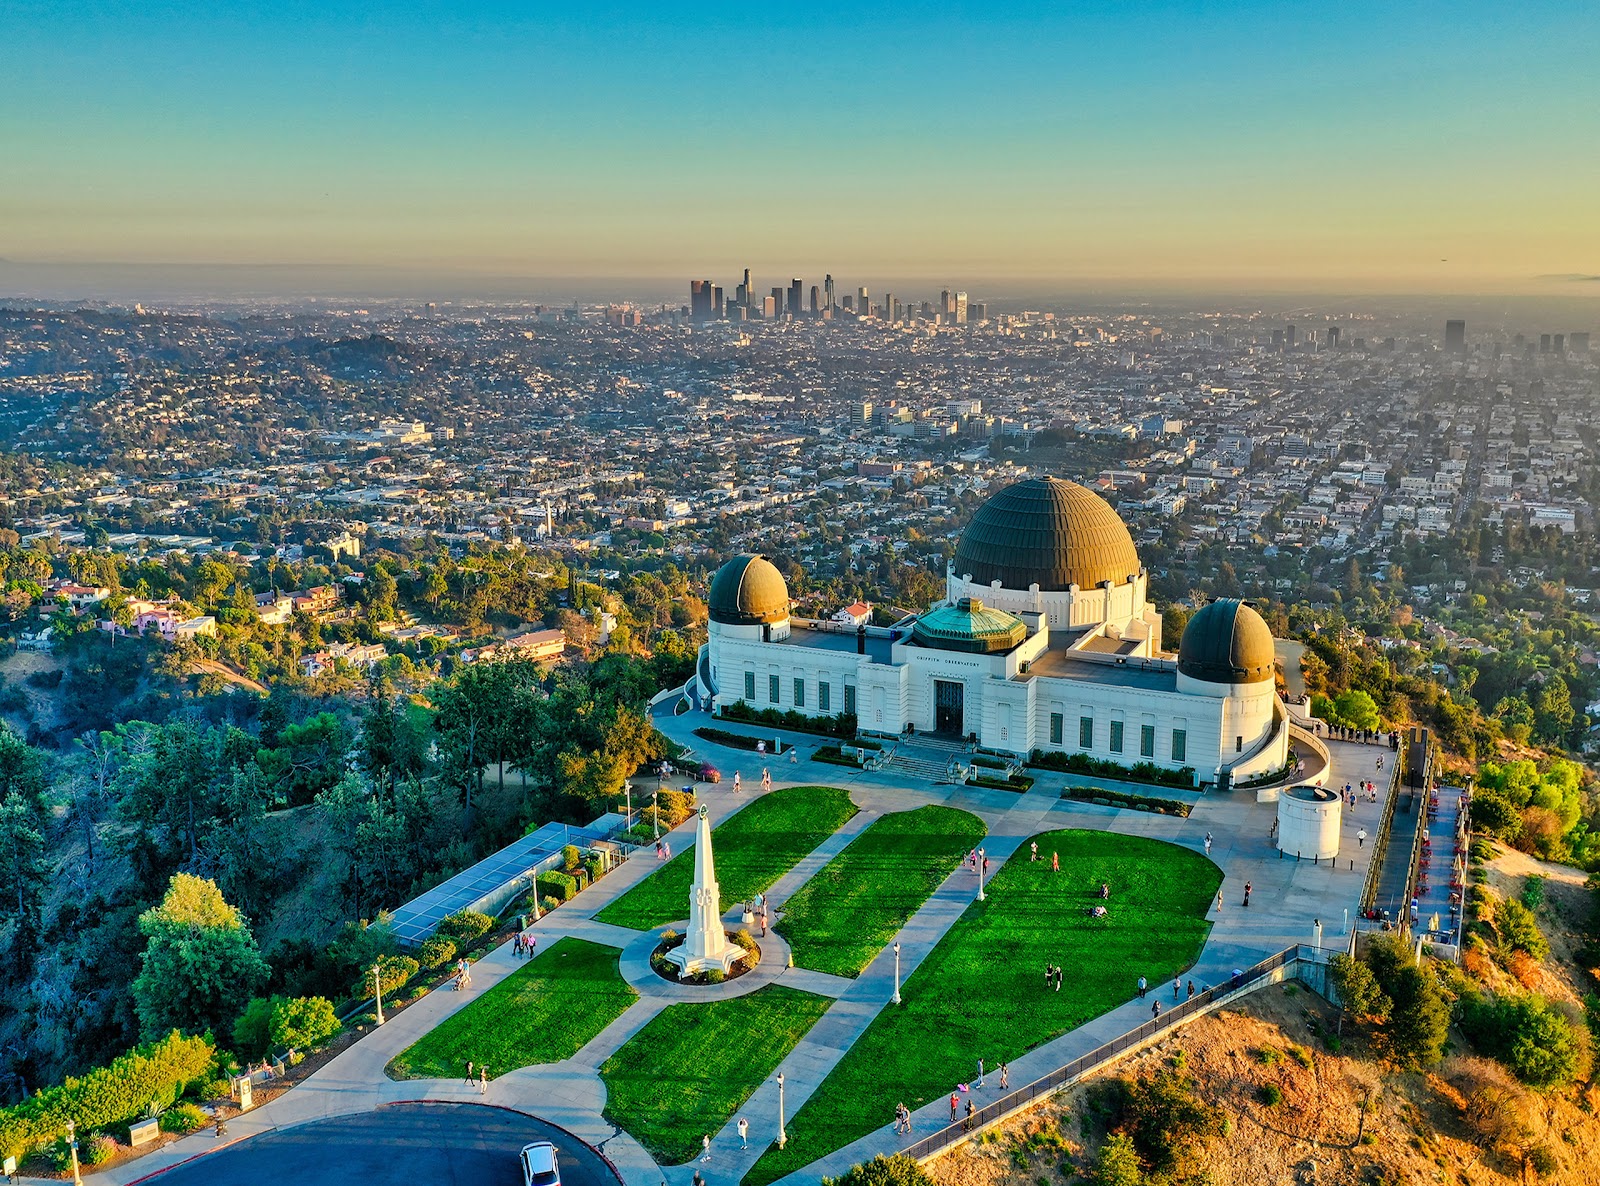 Places to Visit in Los Angeles